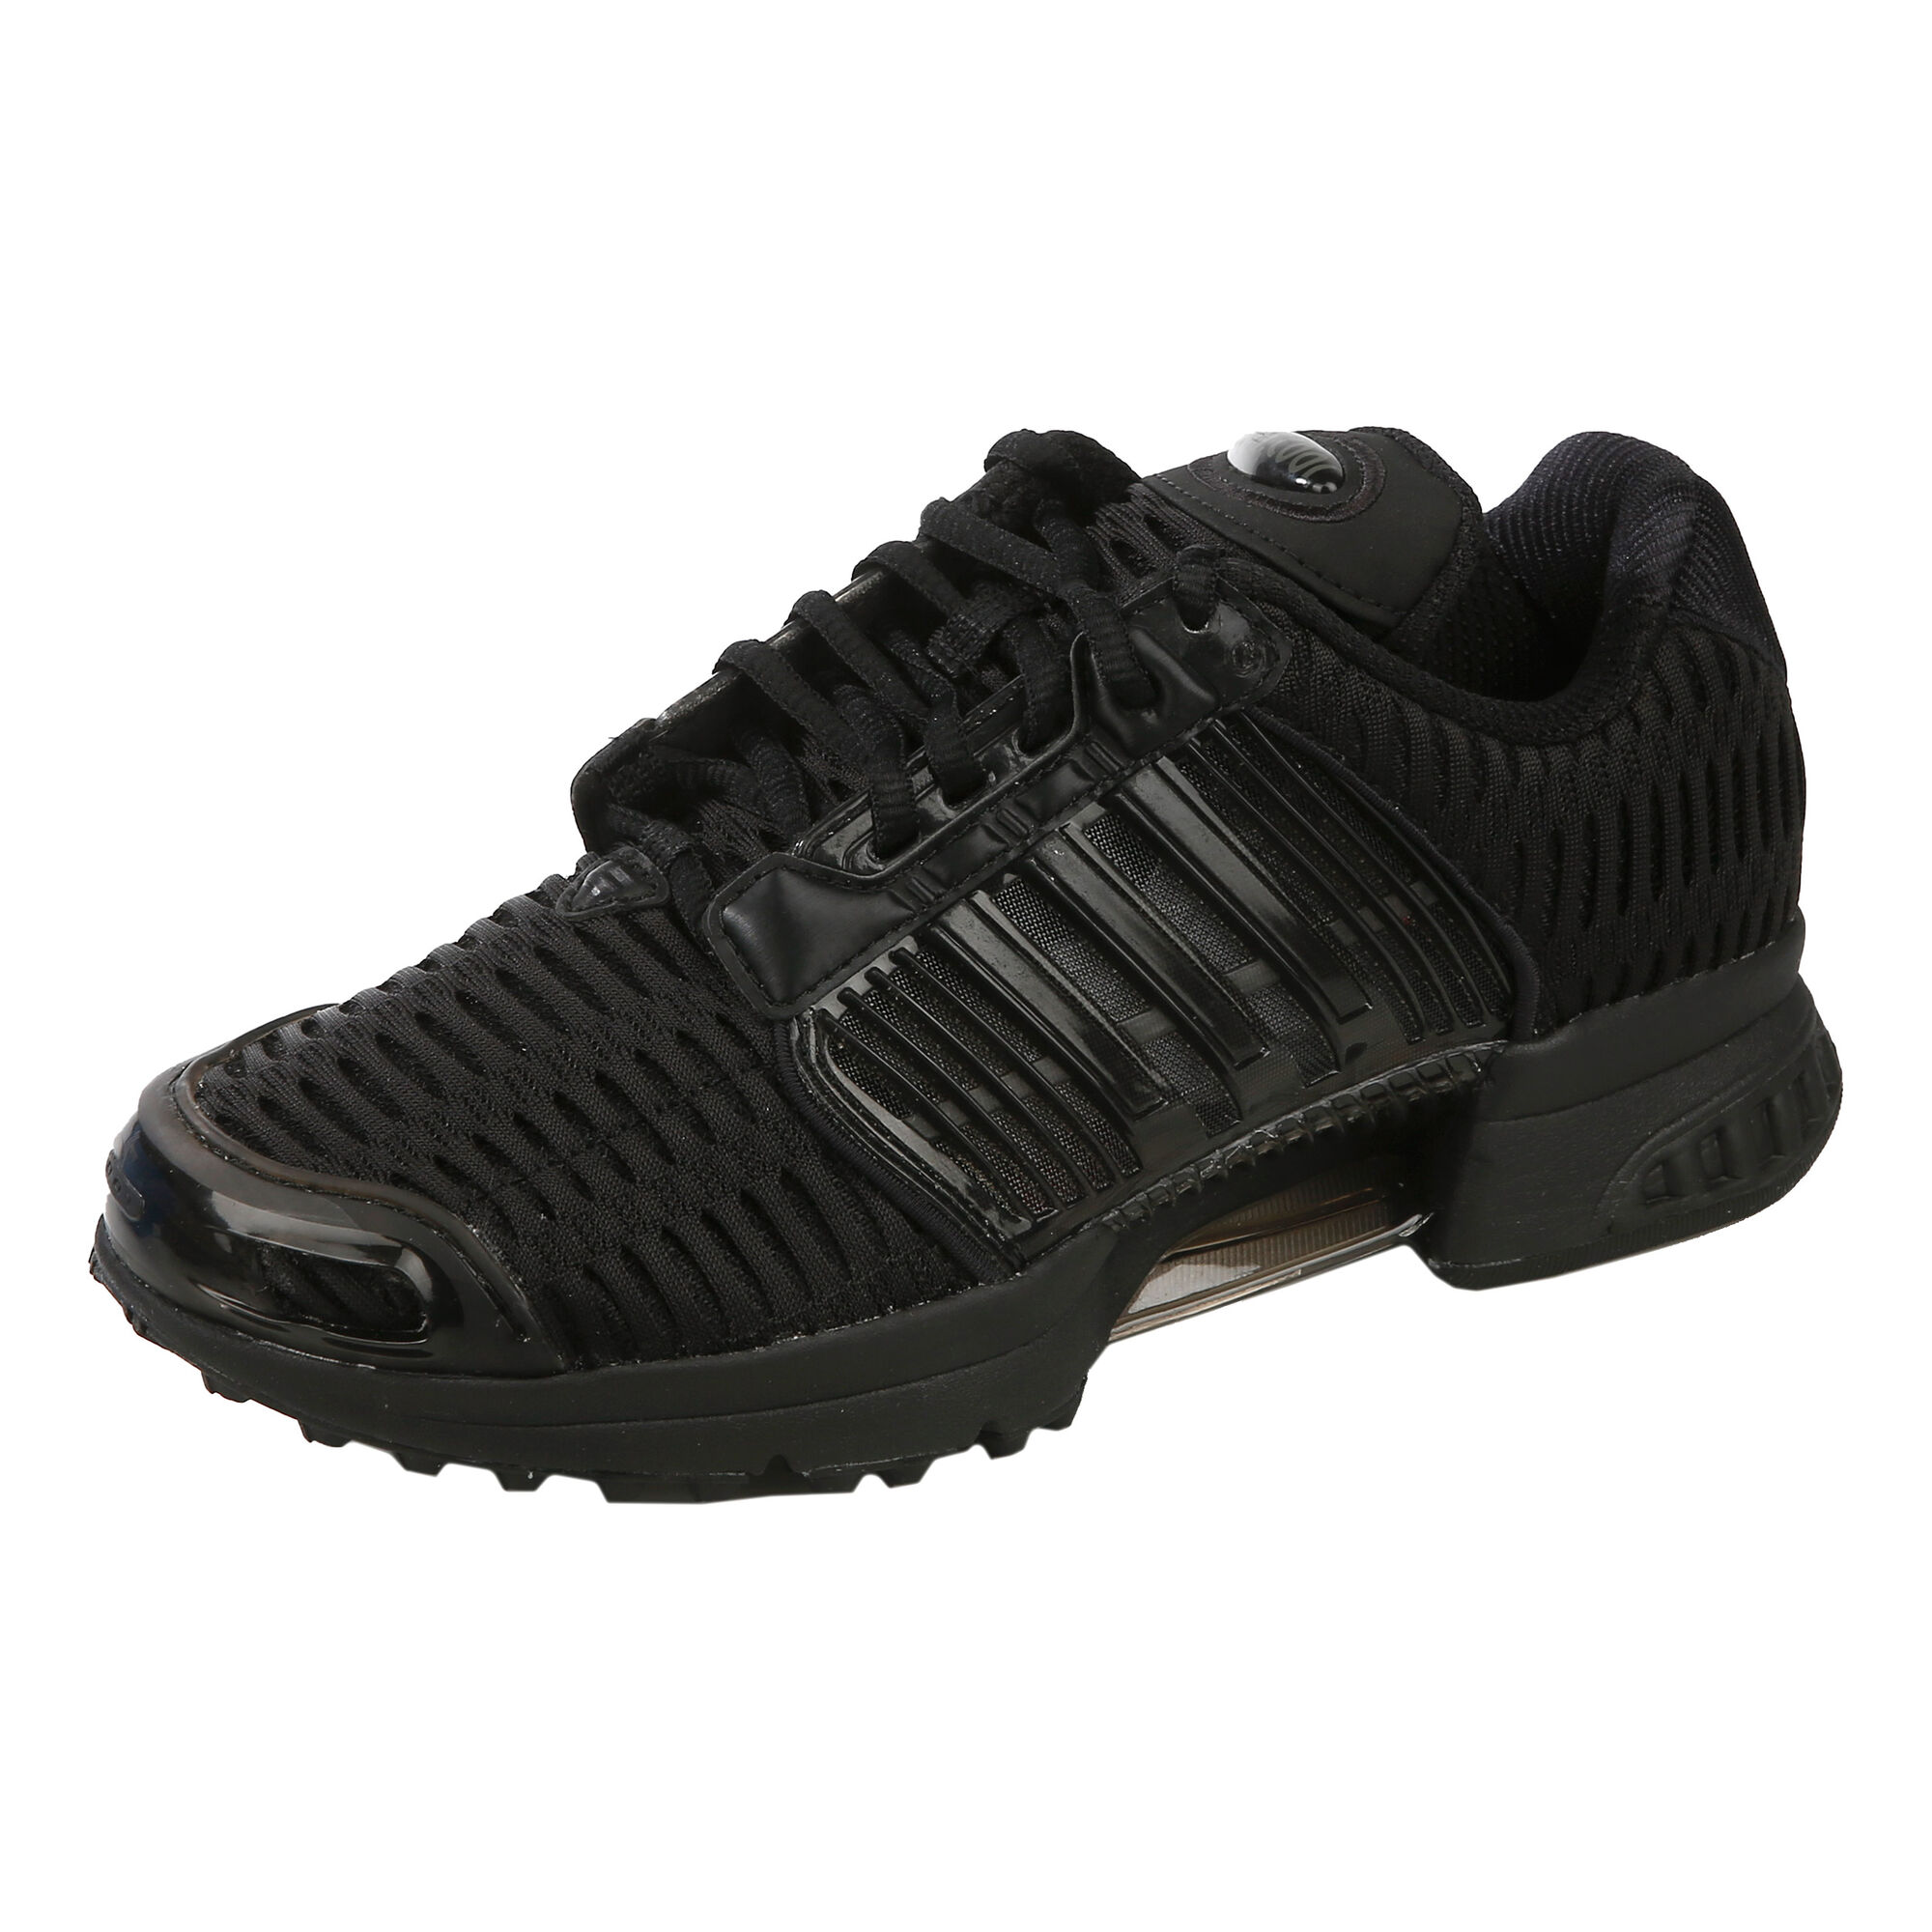 adidas Climacool 1 Neutral Hombres - Negro compra online | Running